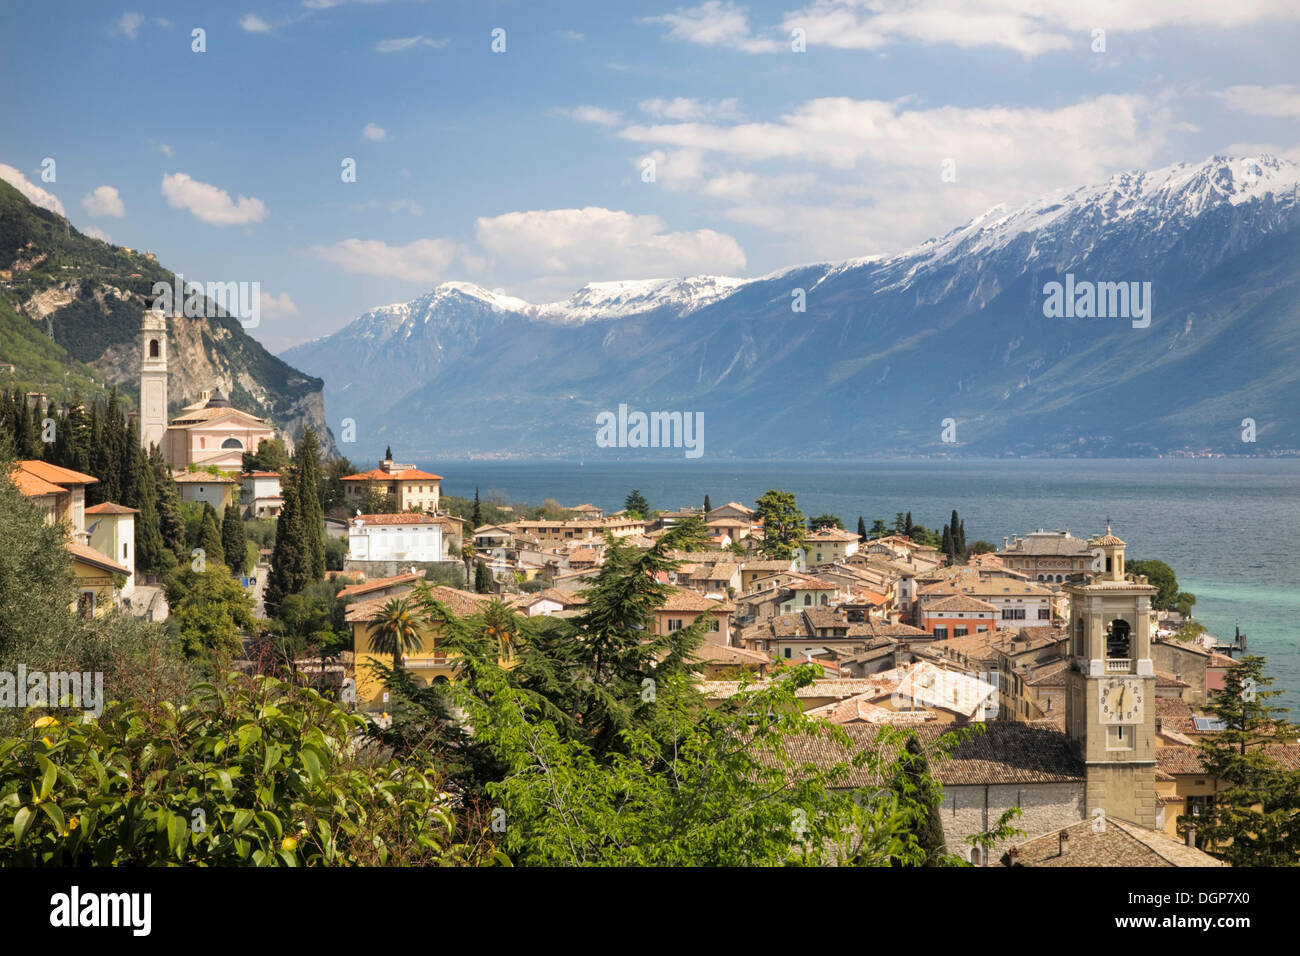 Gargnano on Lake Garda in front of the snowy peaks of Mount Baldo, Lombardy, Italy, Europe Stock Photo